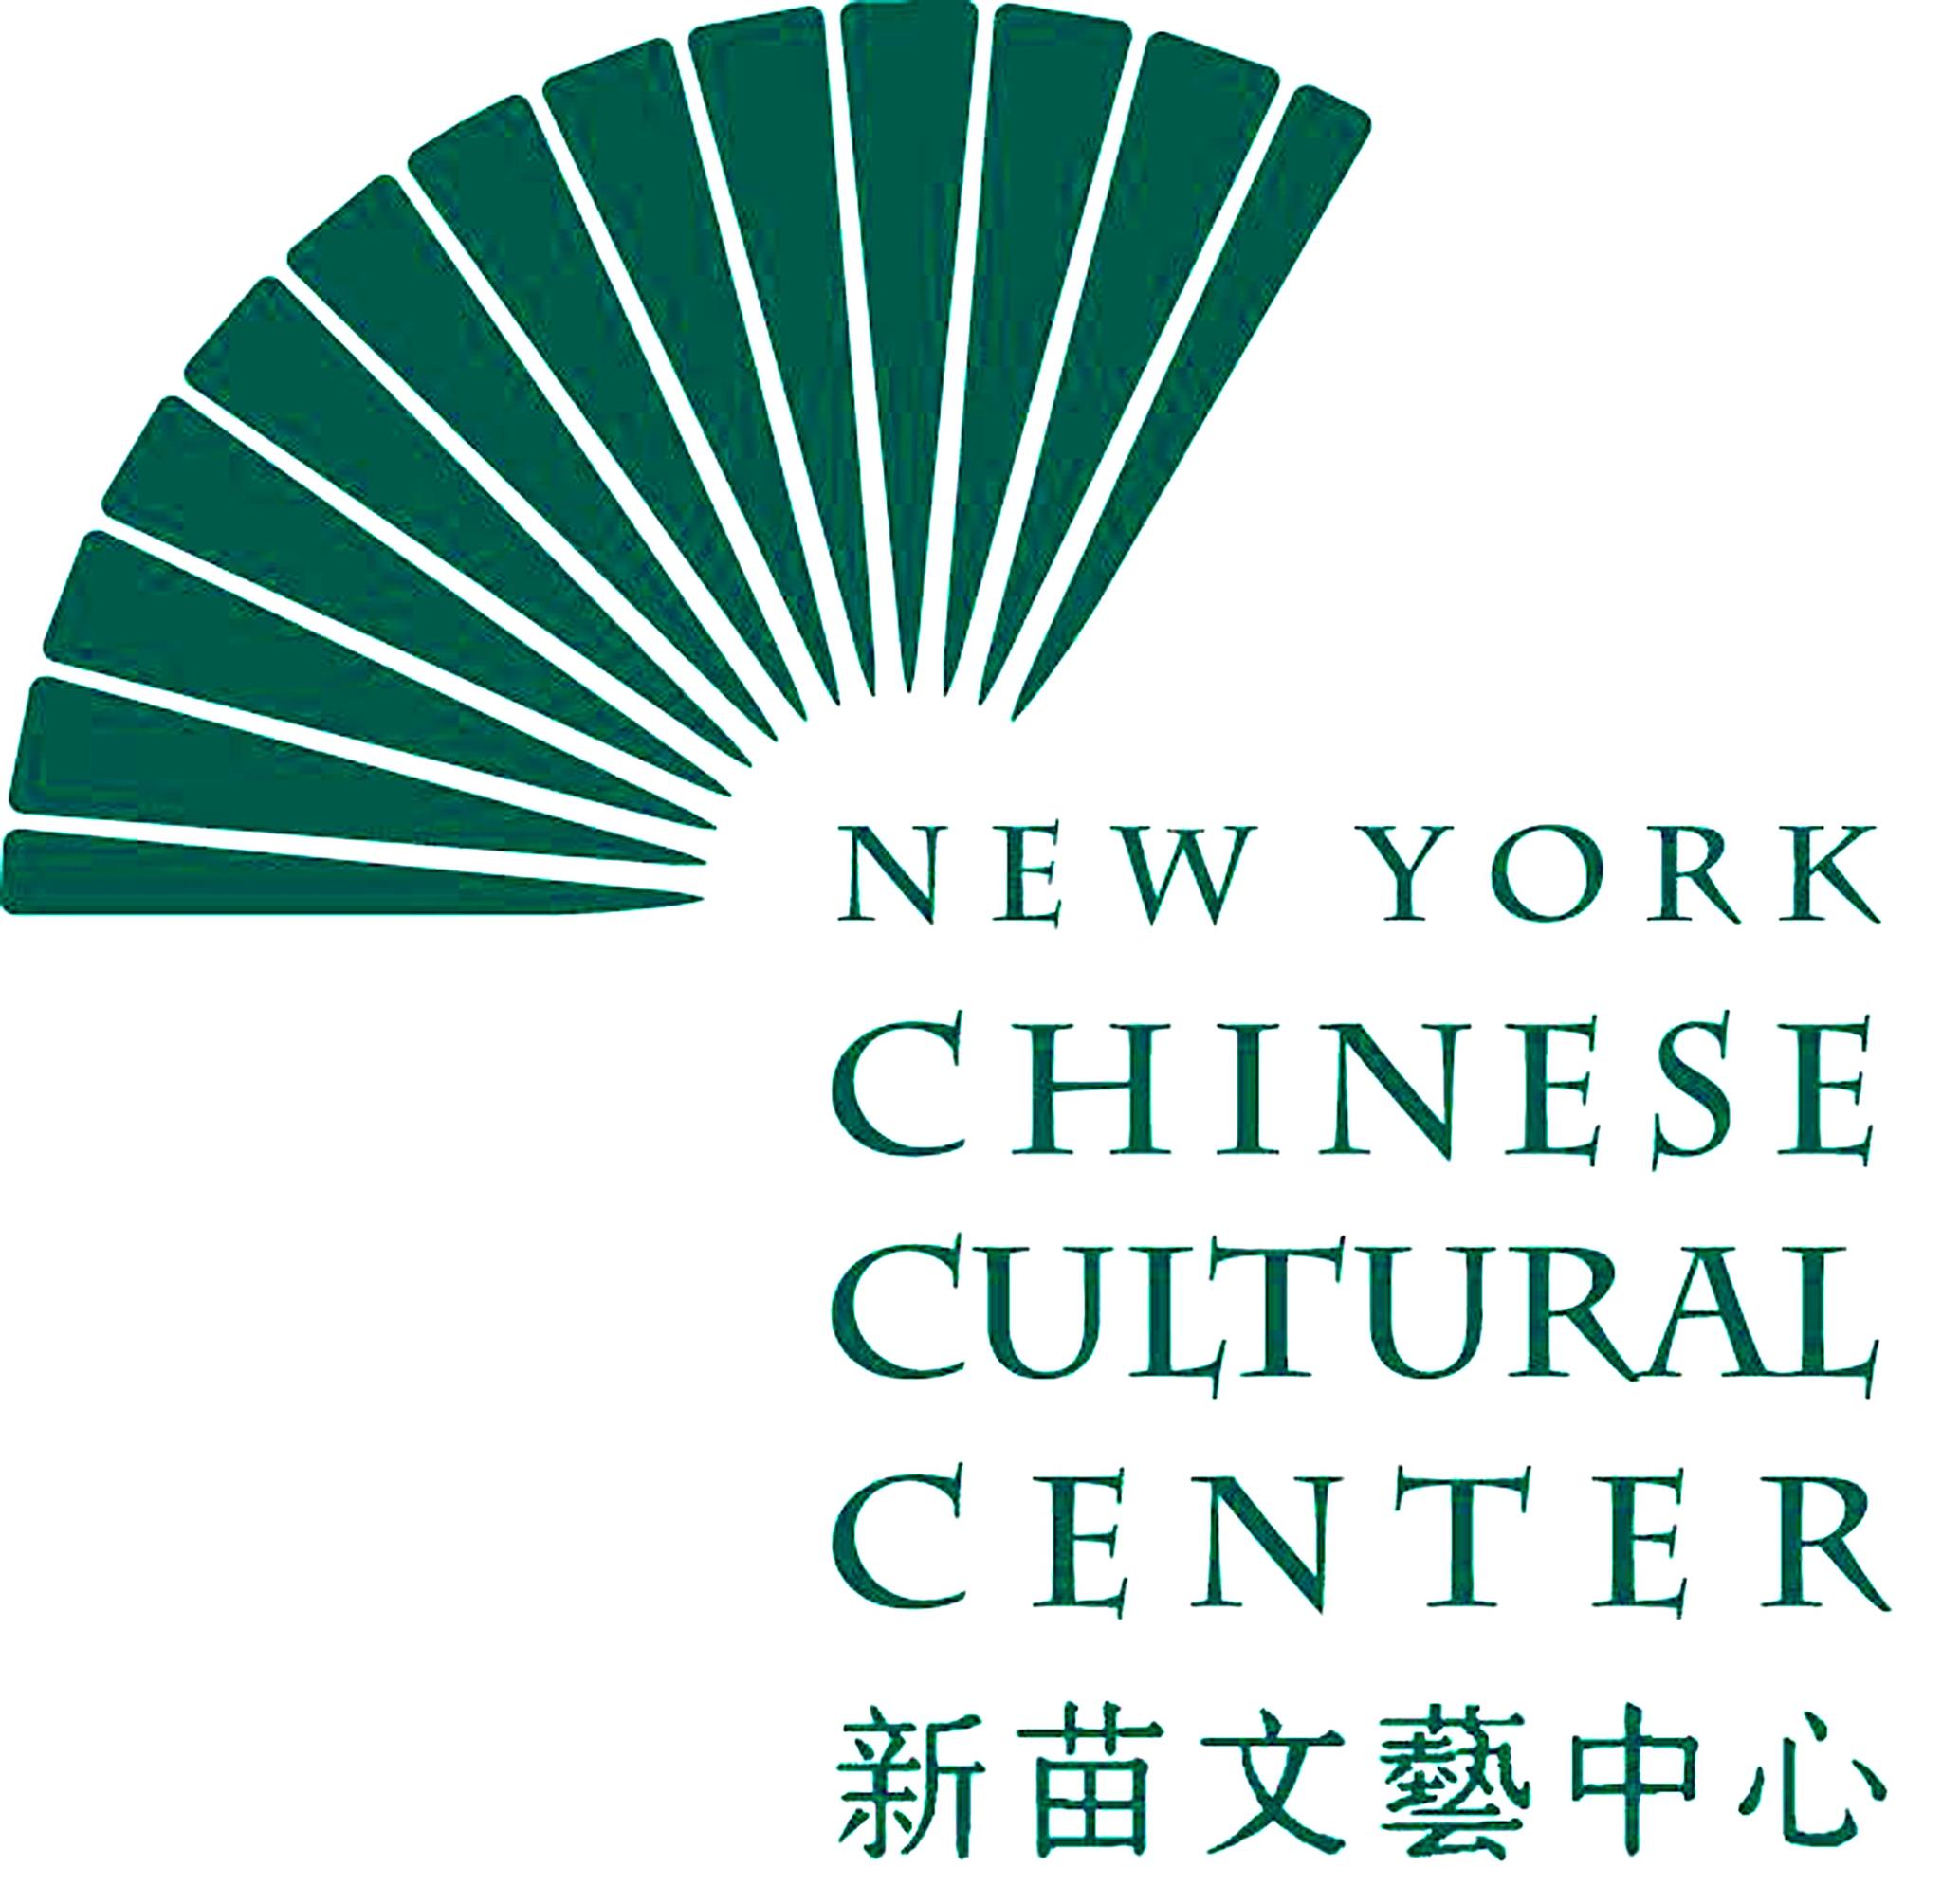 New York Chinese Cultural Center logo